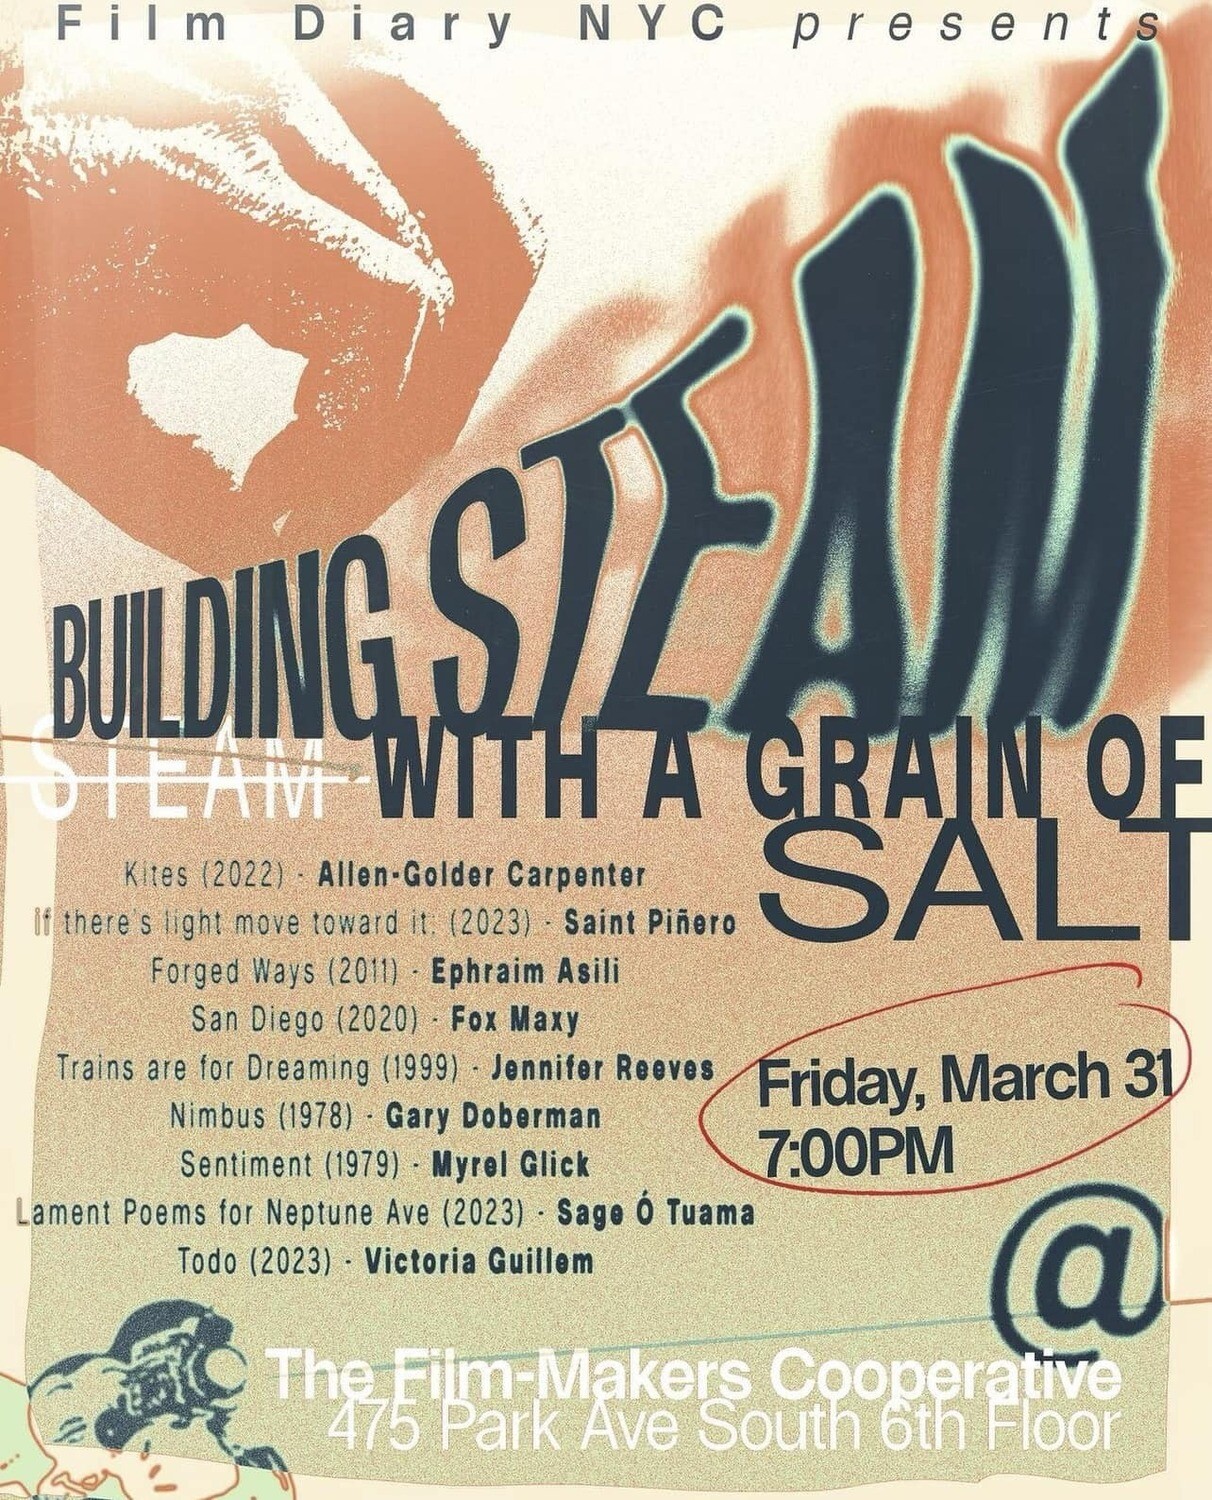 Film Diary NYC Presents: Building Steam with a Grain of Salt